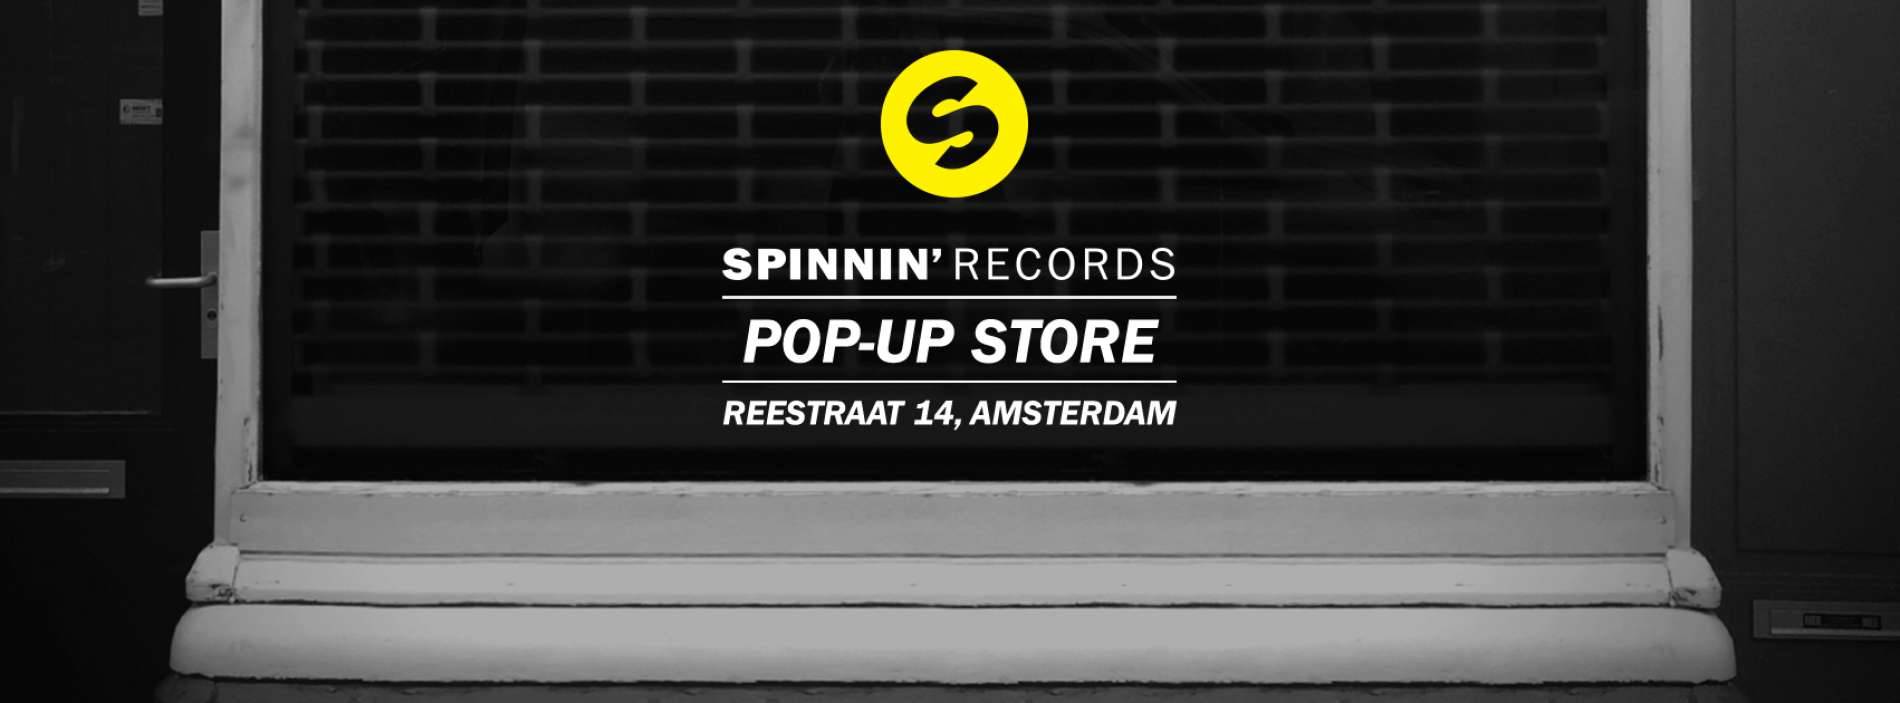 Spinnin' Records opens Pop-up Store